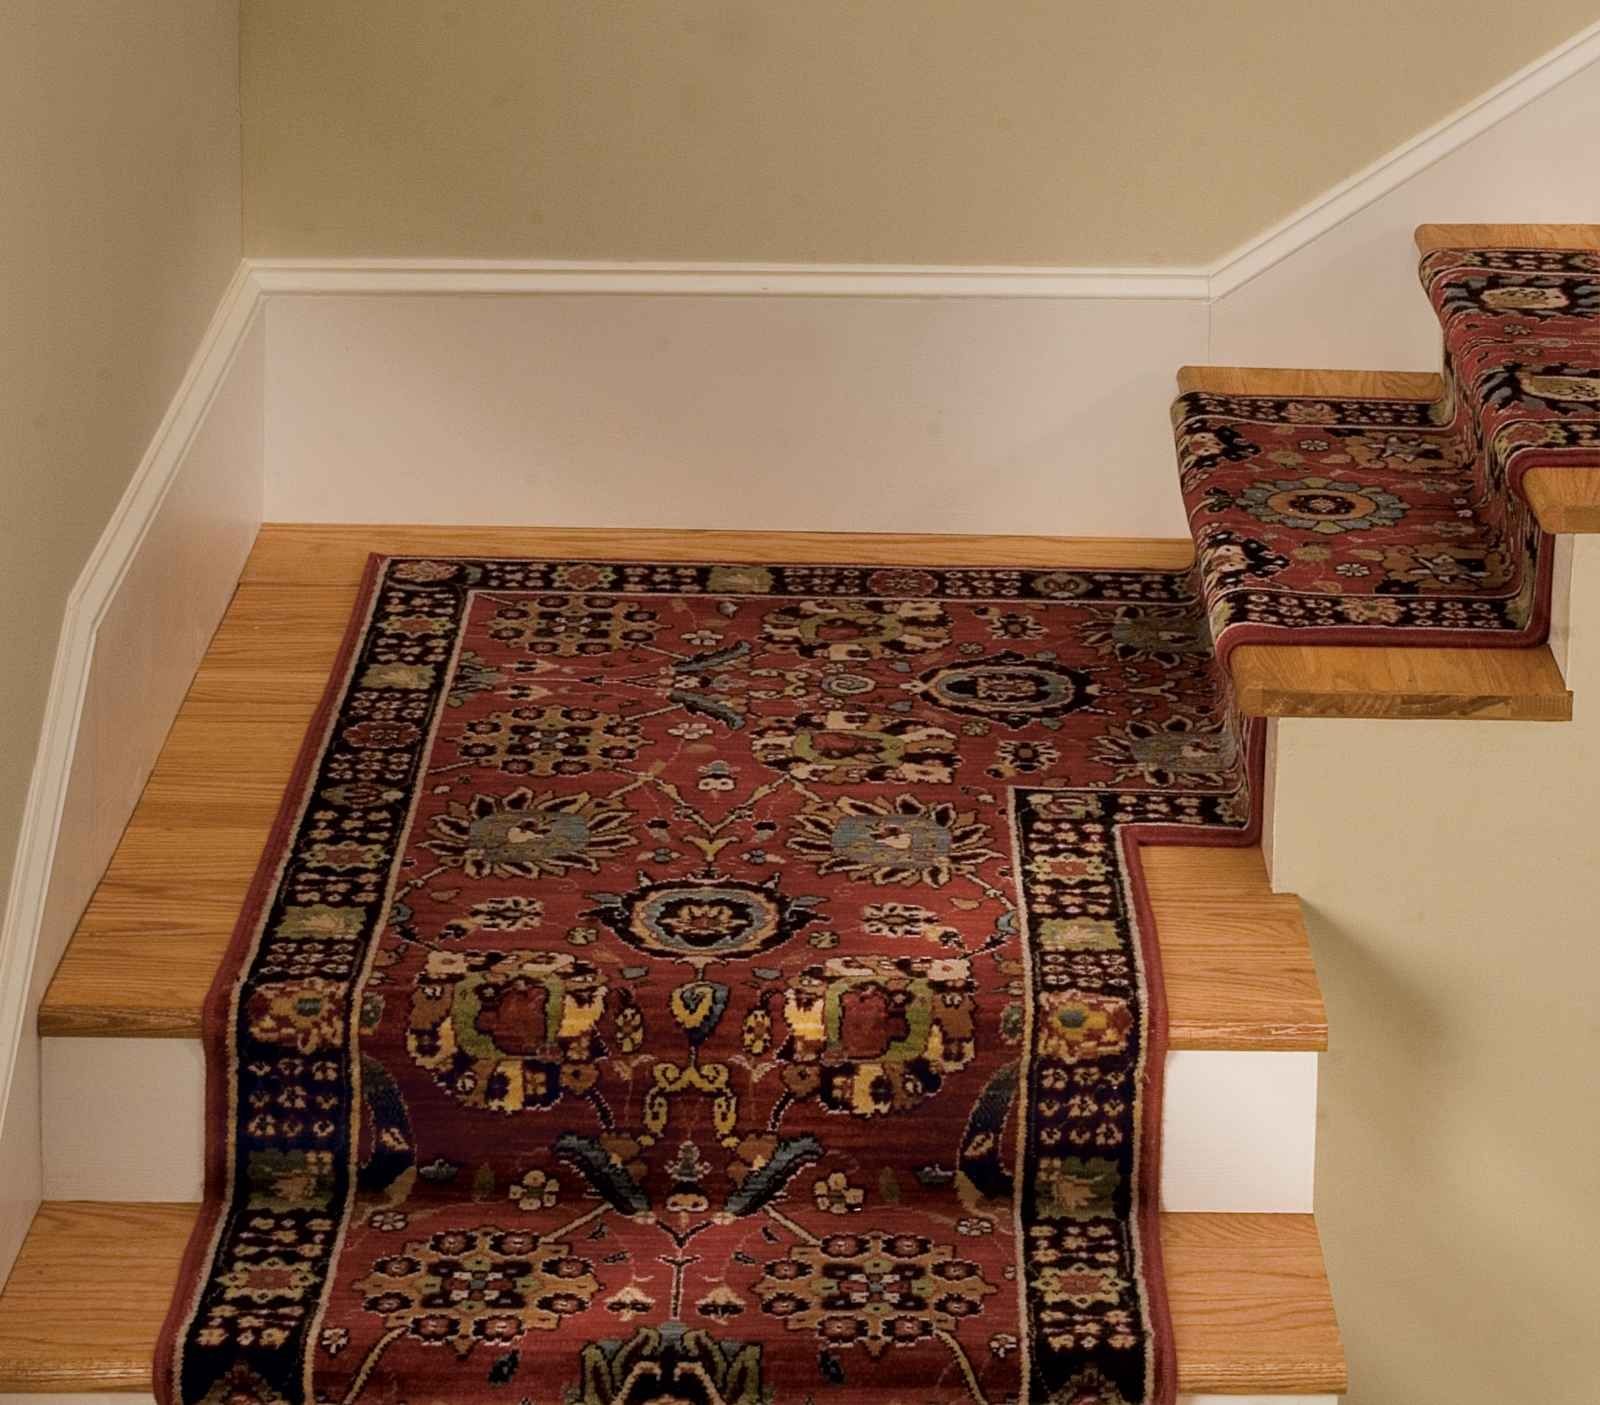 Carpet Stair Runner For Home New Home Pinterest Stair Treads With Regard To Indoor Stair Treads Carpet (View 15 of 15)